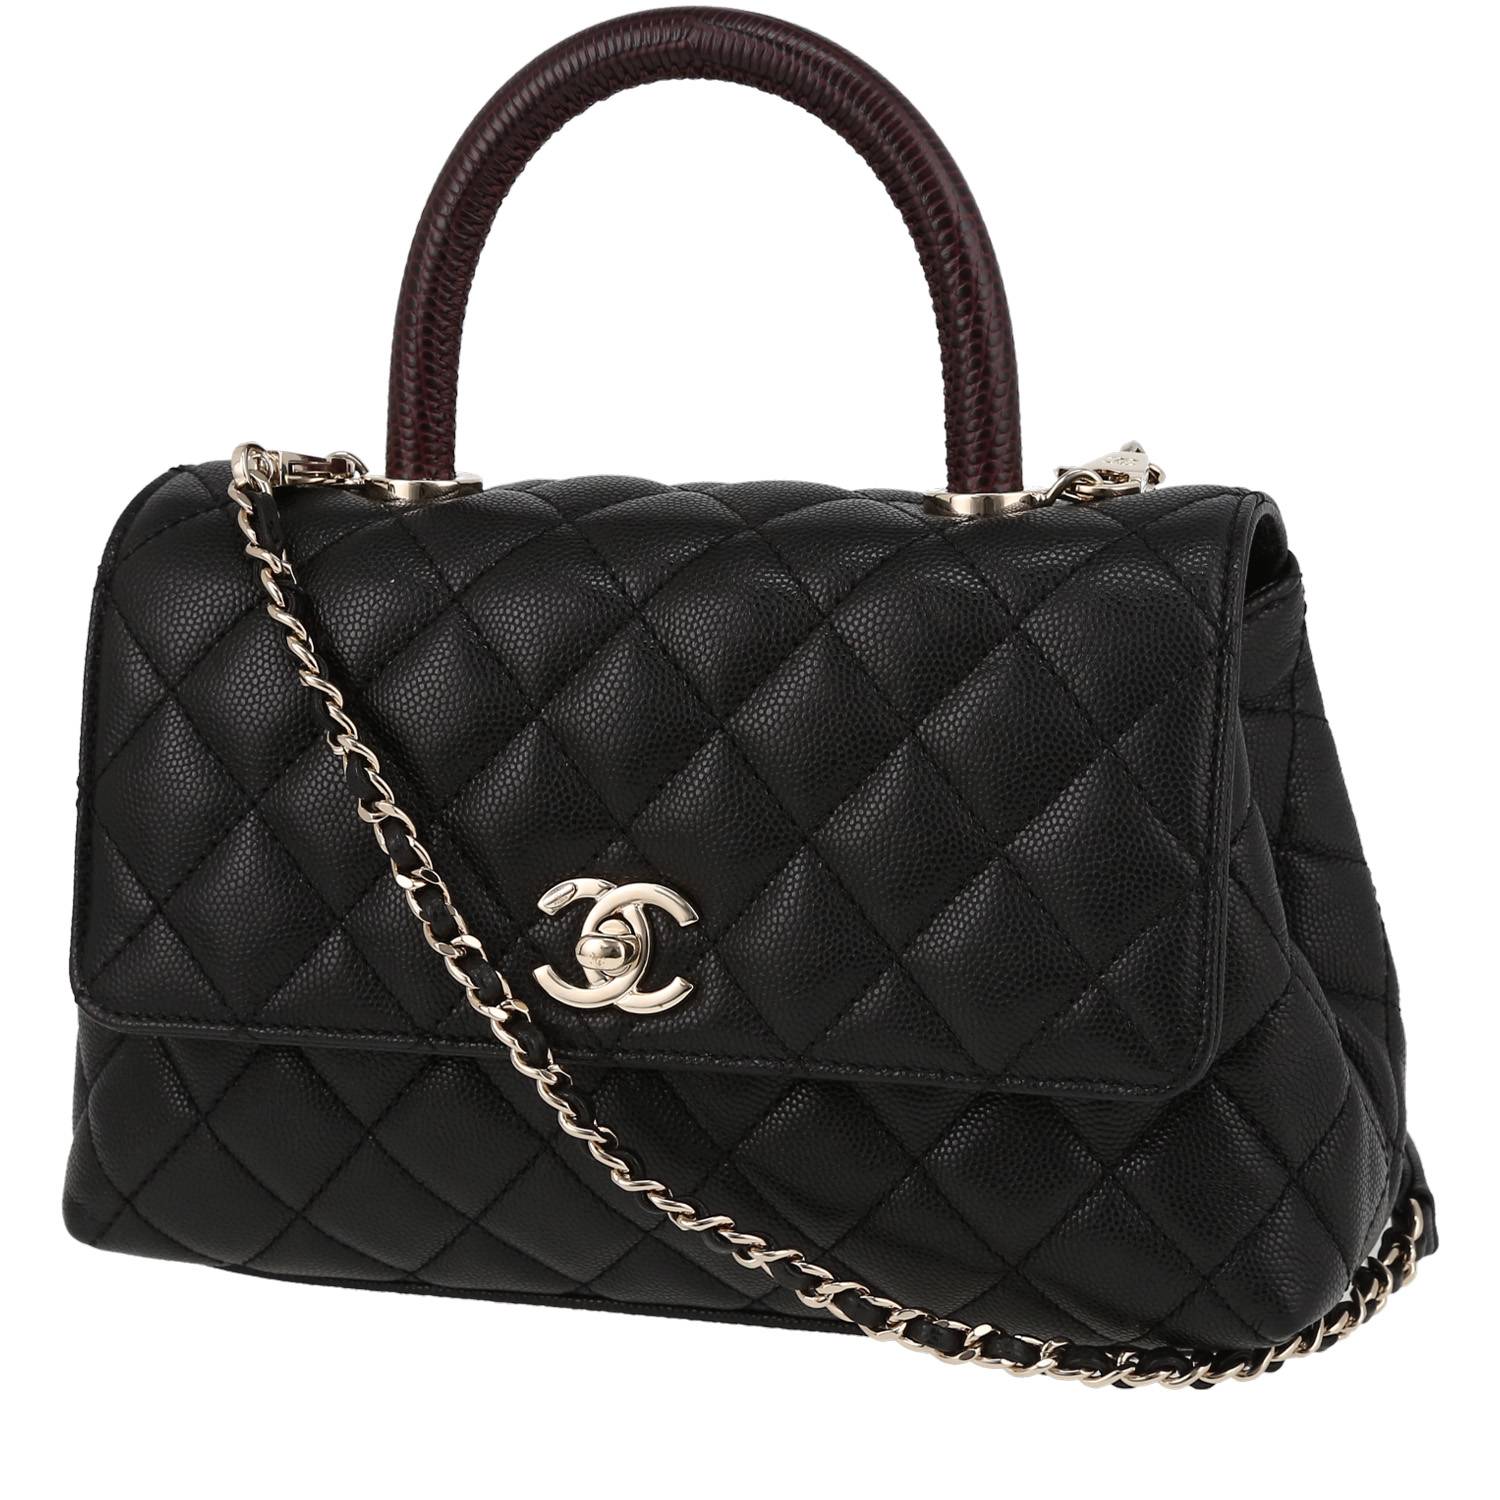 Chanel Bag Funeral Tribute – buy online or call 01634 716154